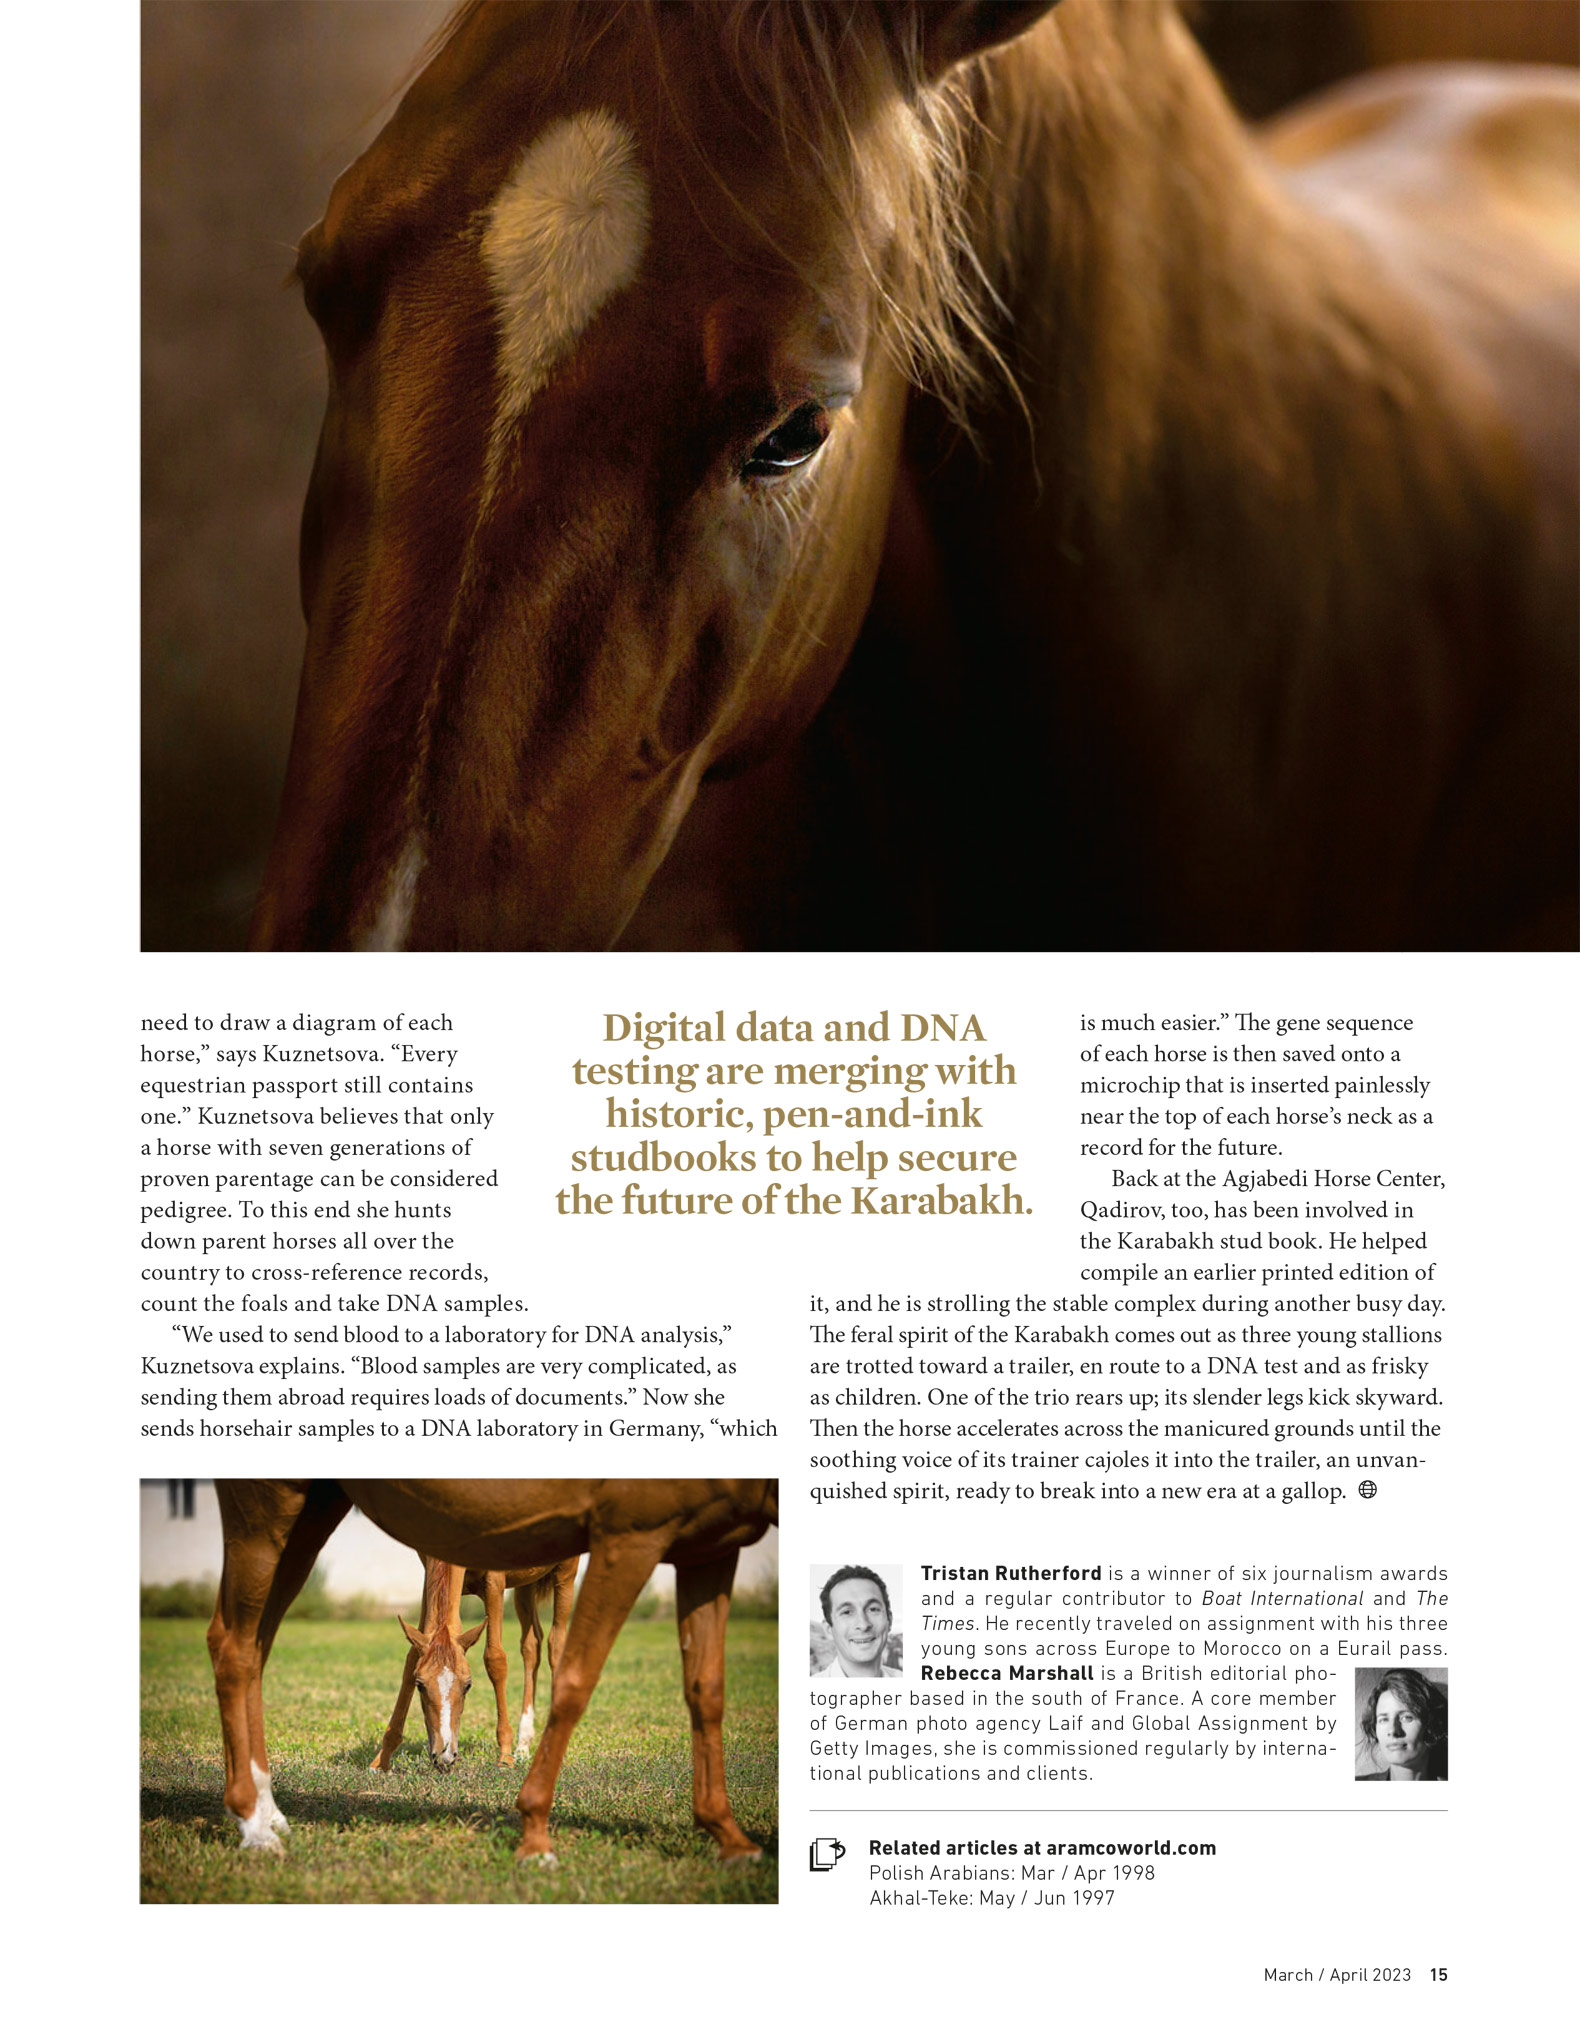 Page of a magazine, showing two photographs of horses